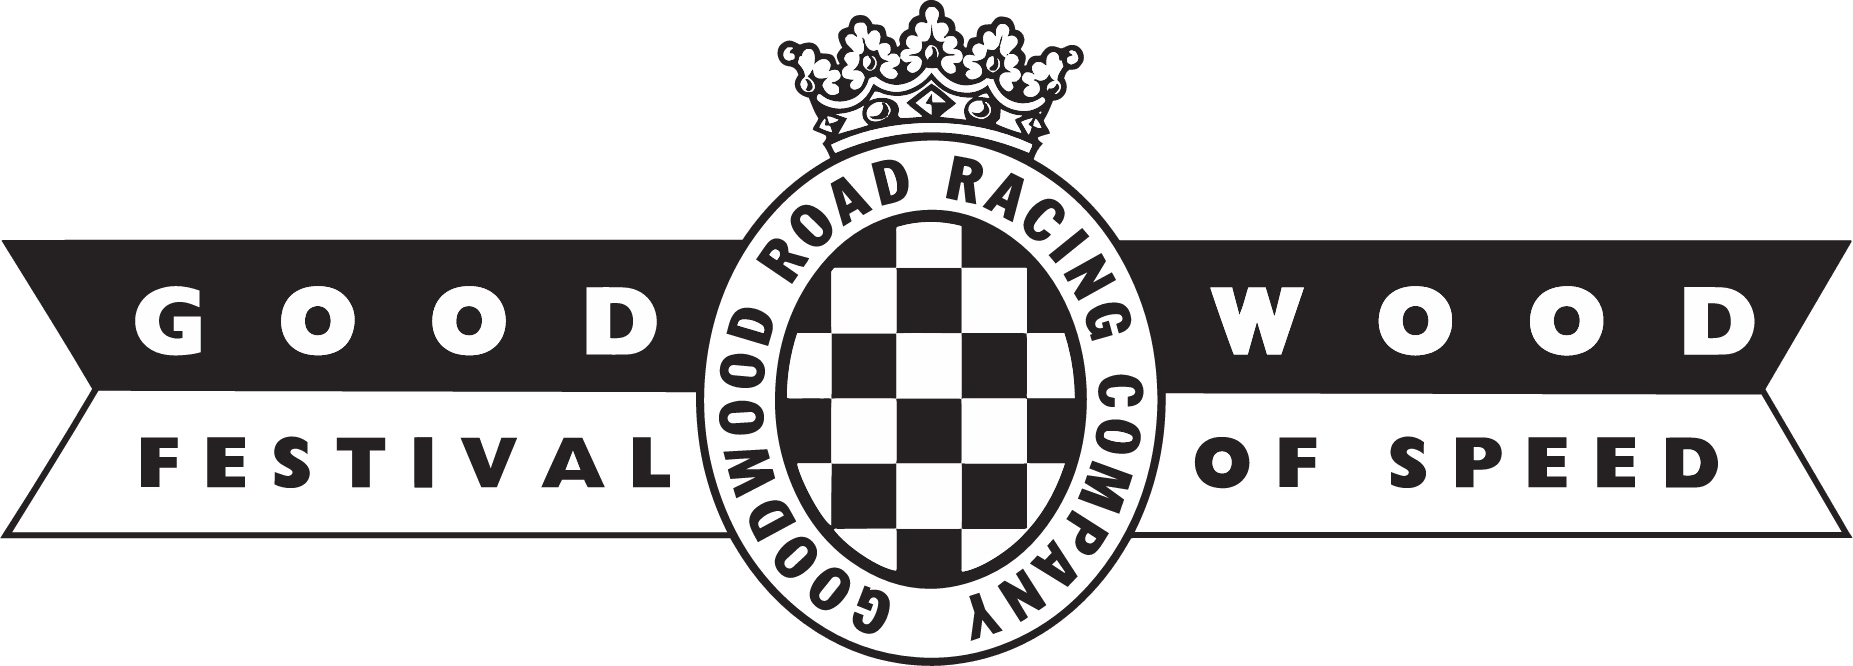 Visit Goodwood Festival Of Speed Canceled For 2020 page